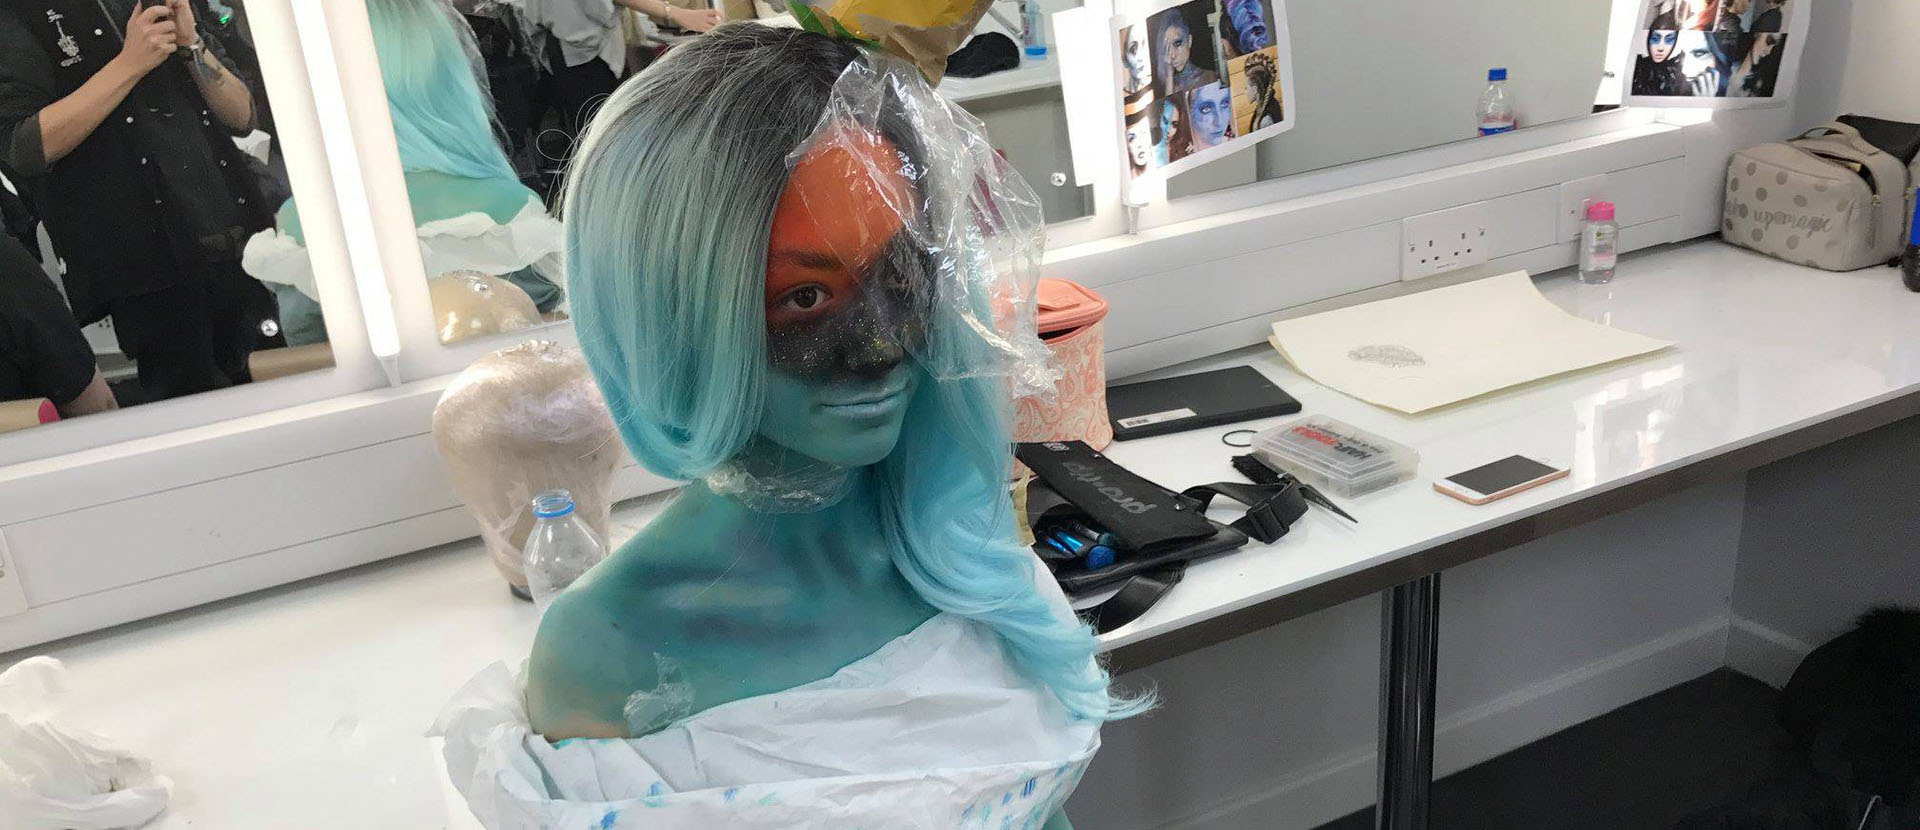 Student with under water prosthetics on her face